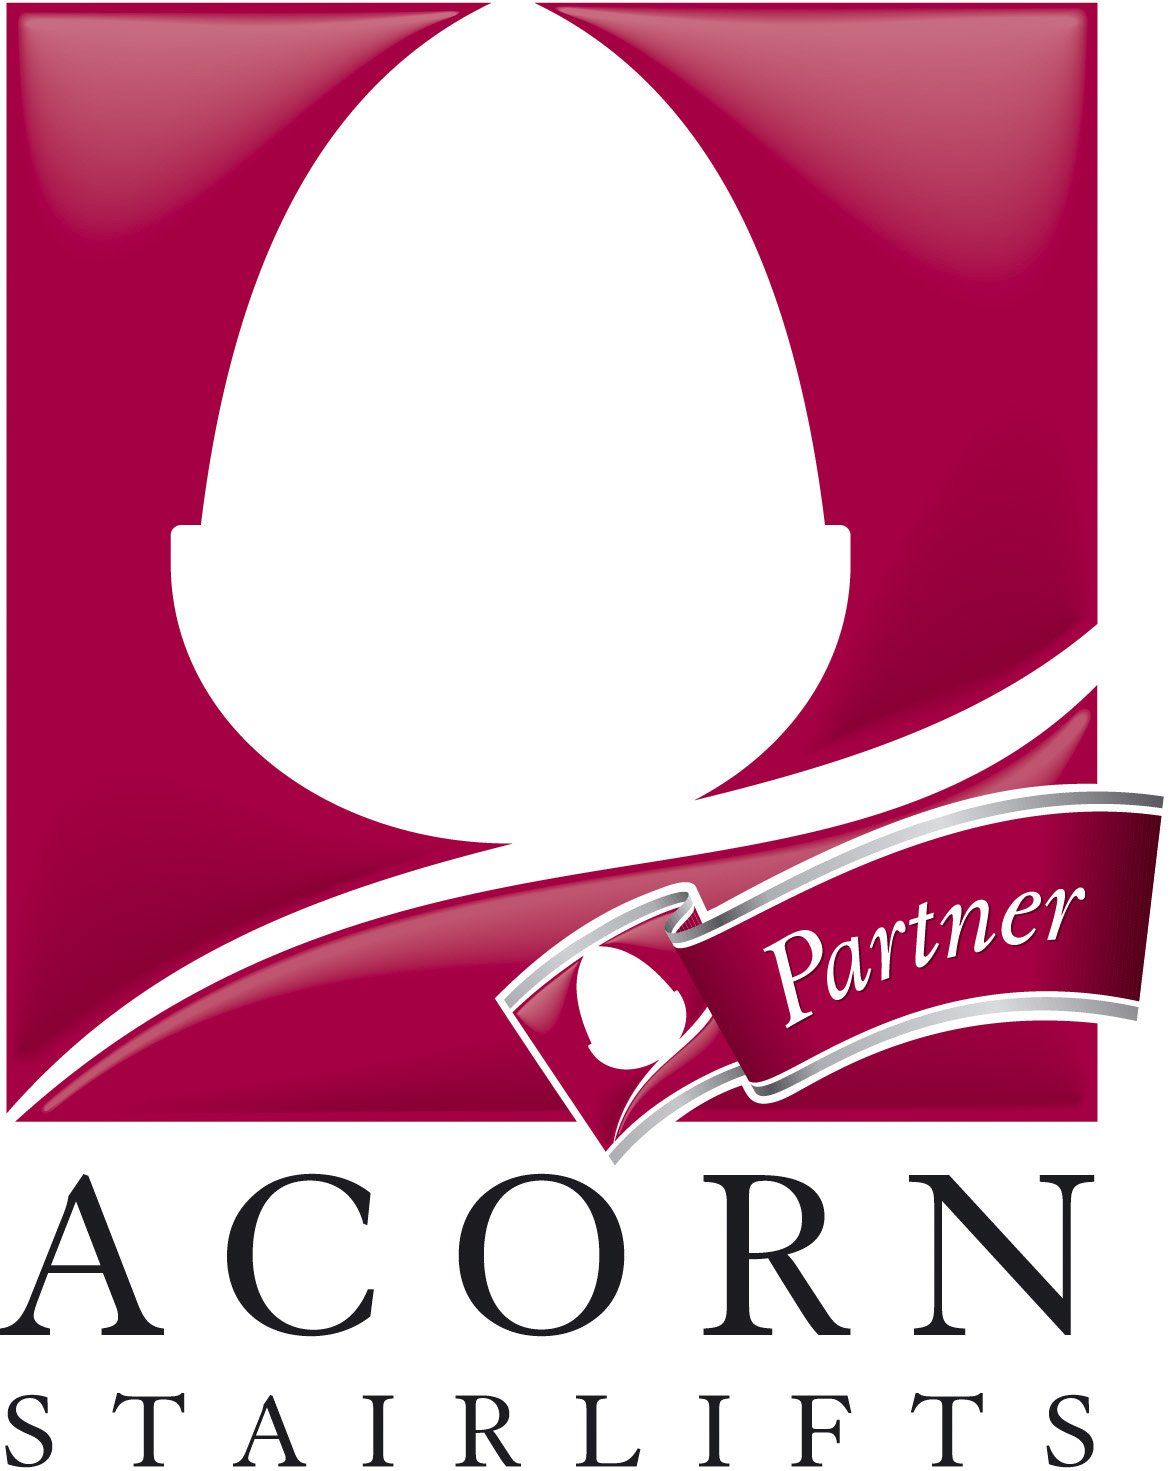 Acorn Stairlifts Manchester - Helping Hand Stairlifts Manchester